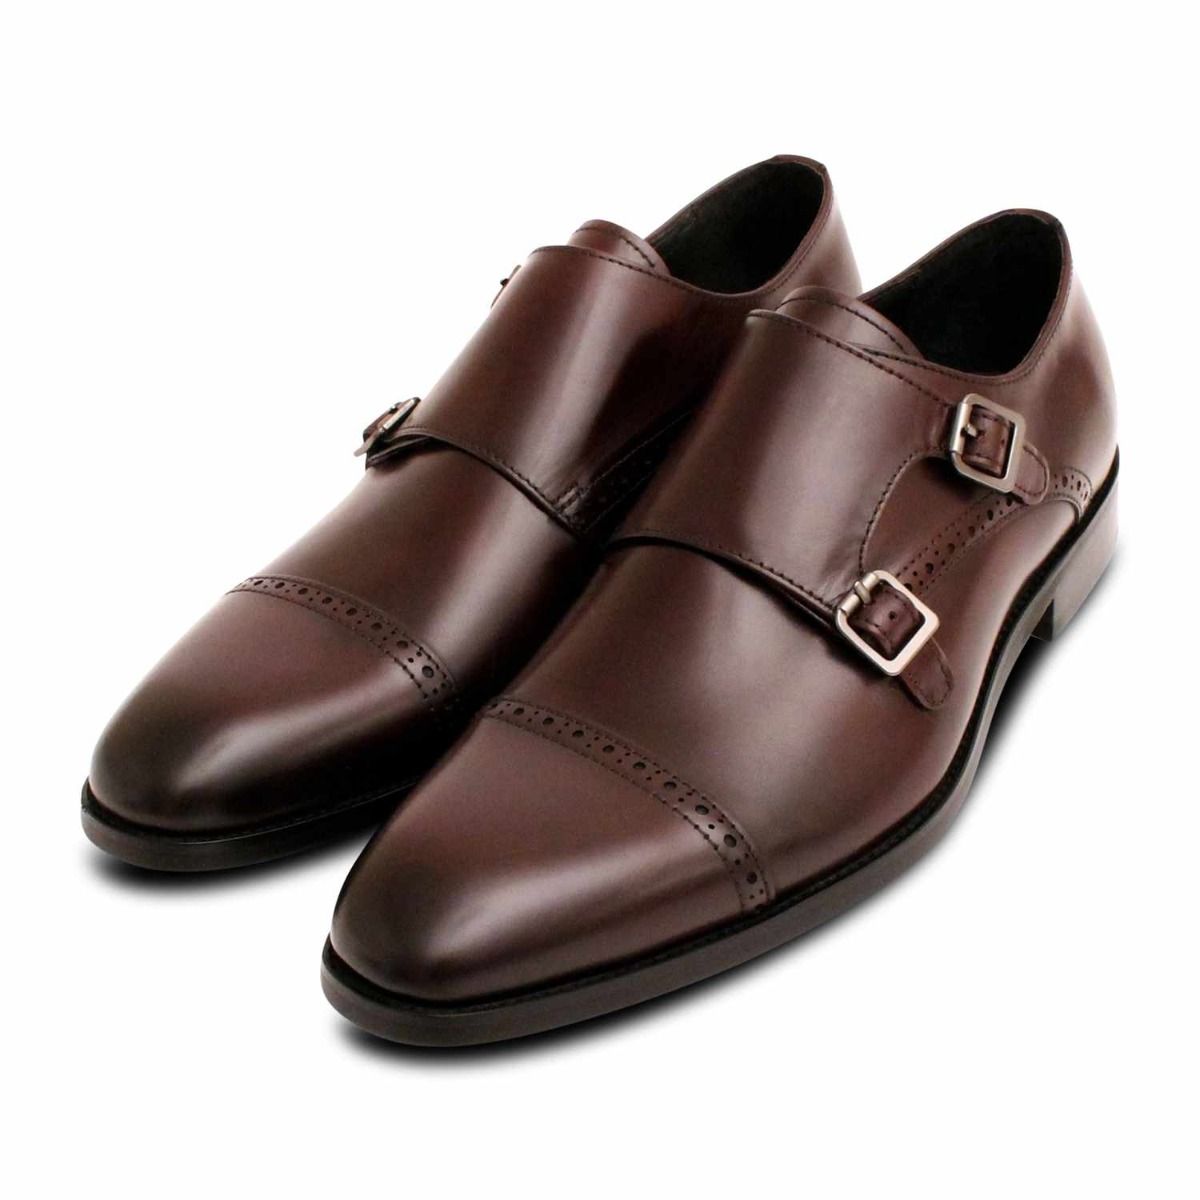 John White Double Buckle Monk Strap Shoes in Brown